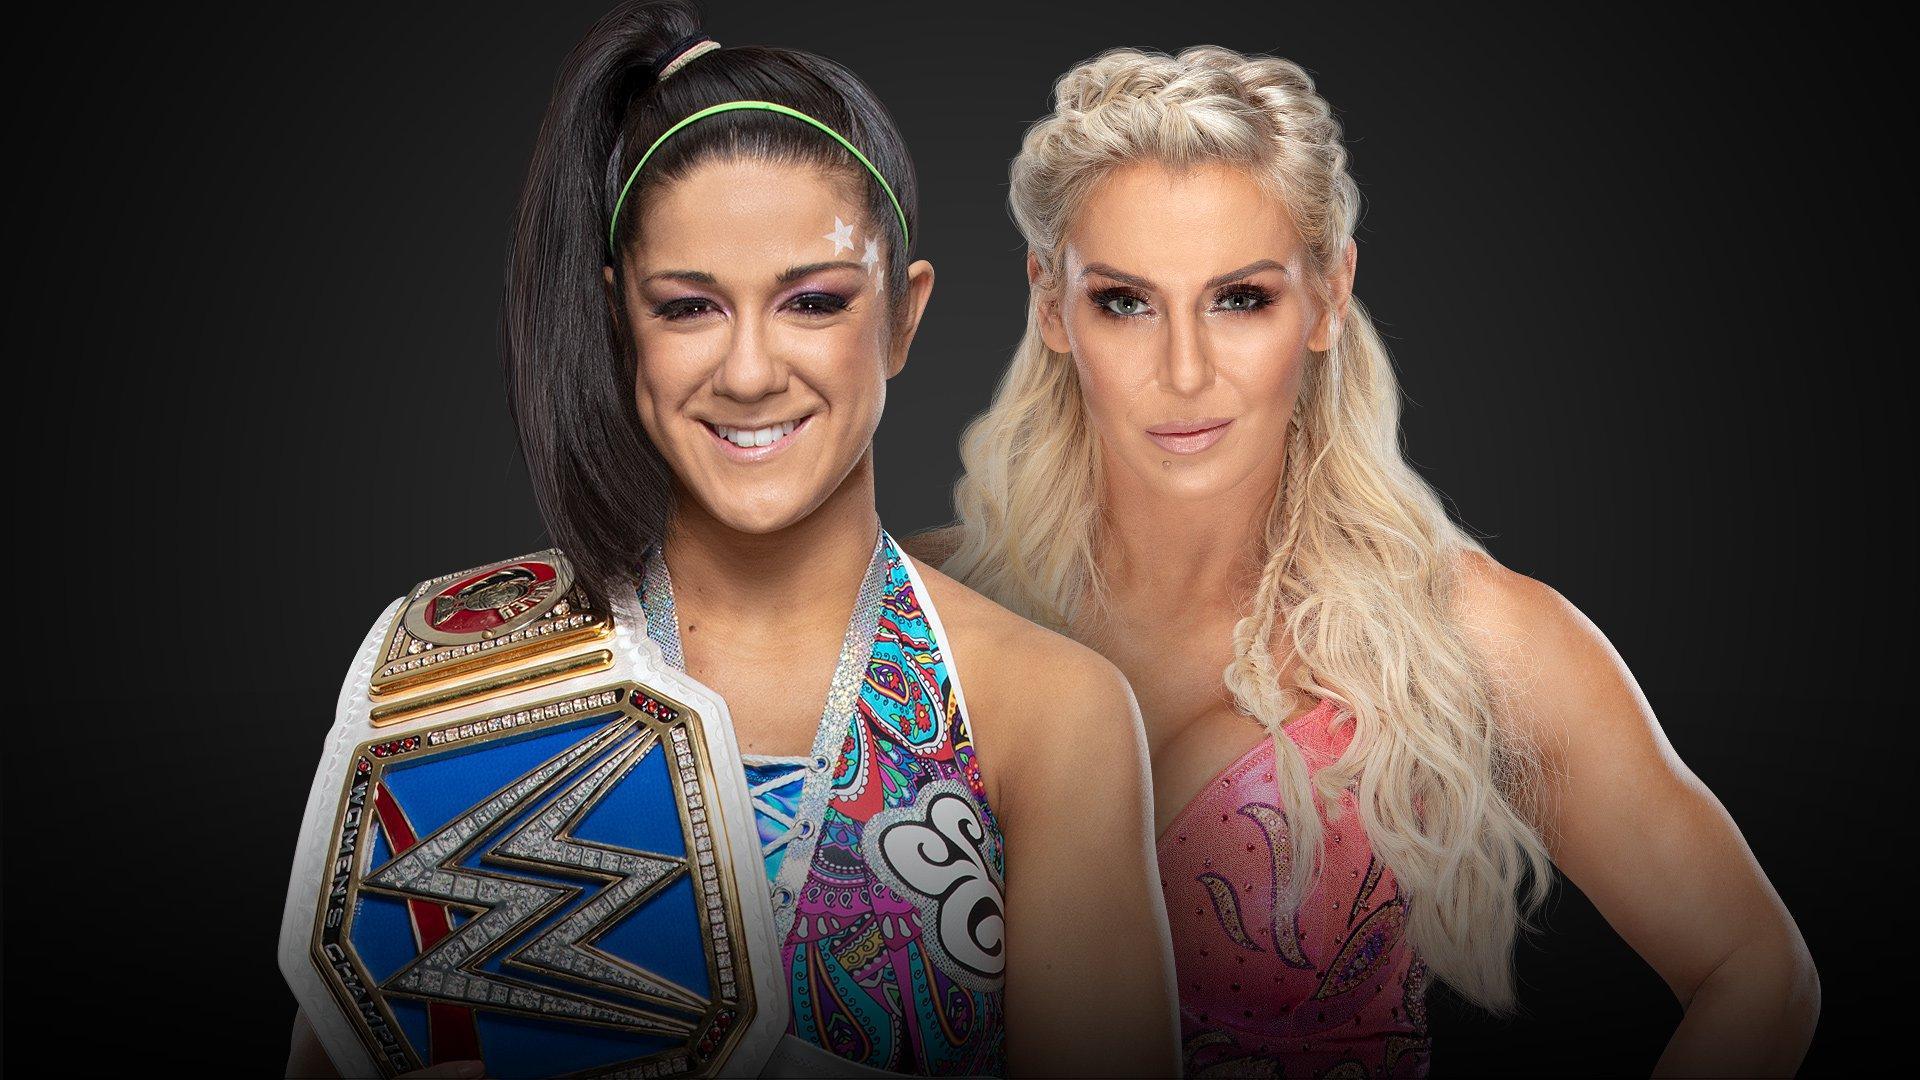 Bayley vs. Charlotte Flair set for WWE Clash of Champions